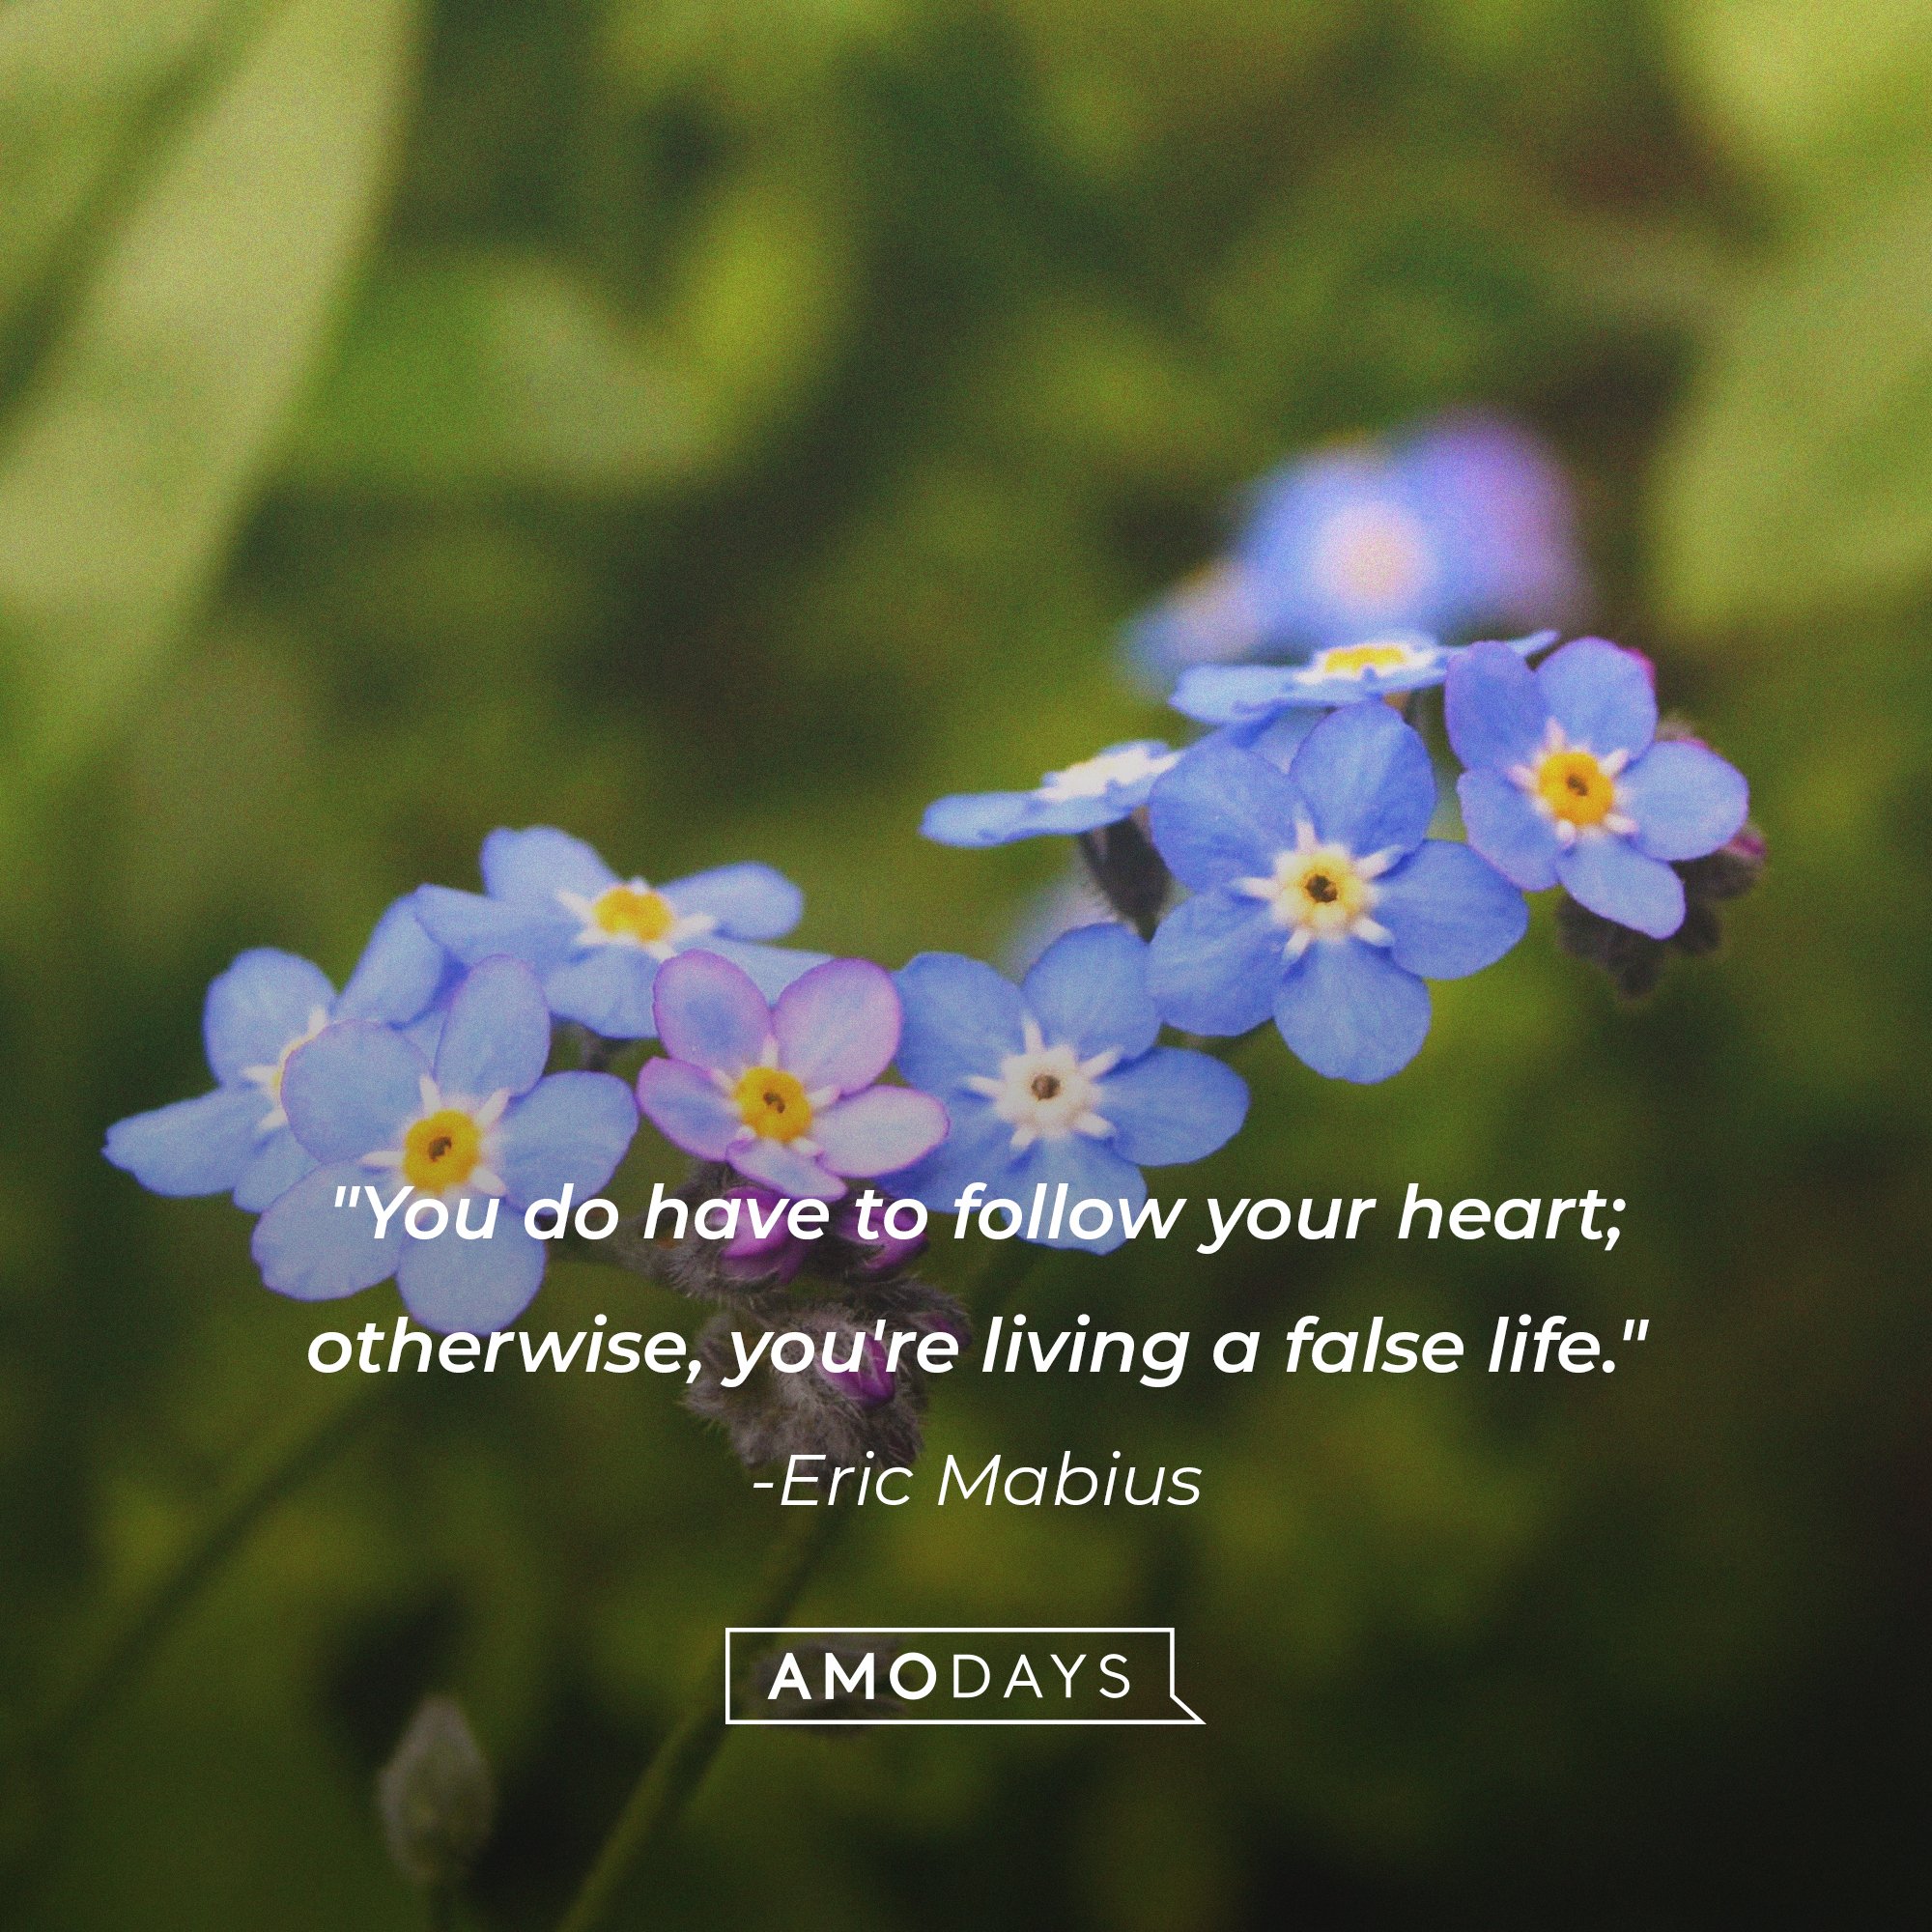 Eric Mabius’ quote: "You do have to follow your heart; otherwise, you're living a false life." | Image: AmoDays 